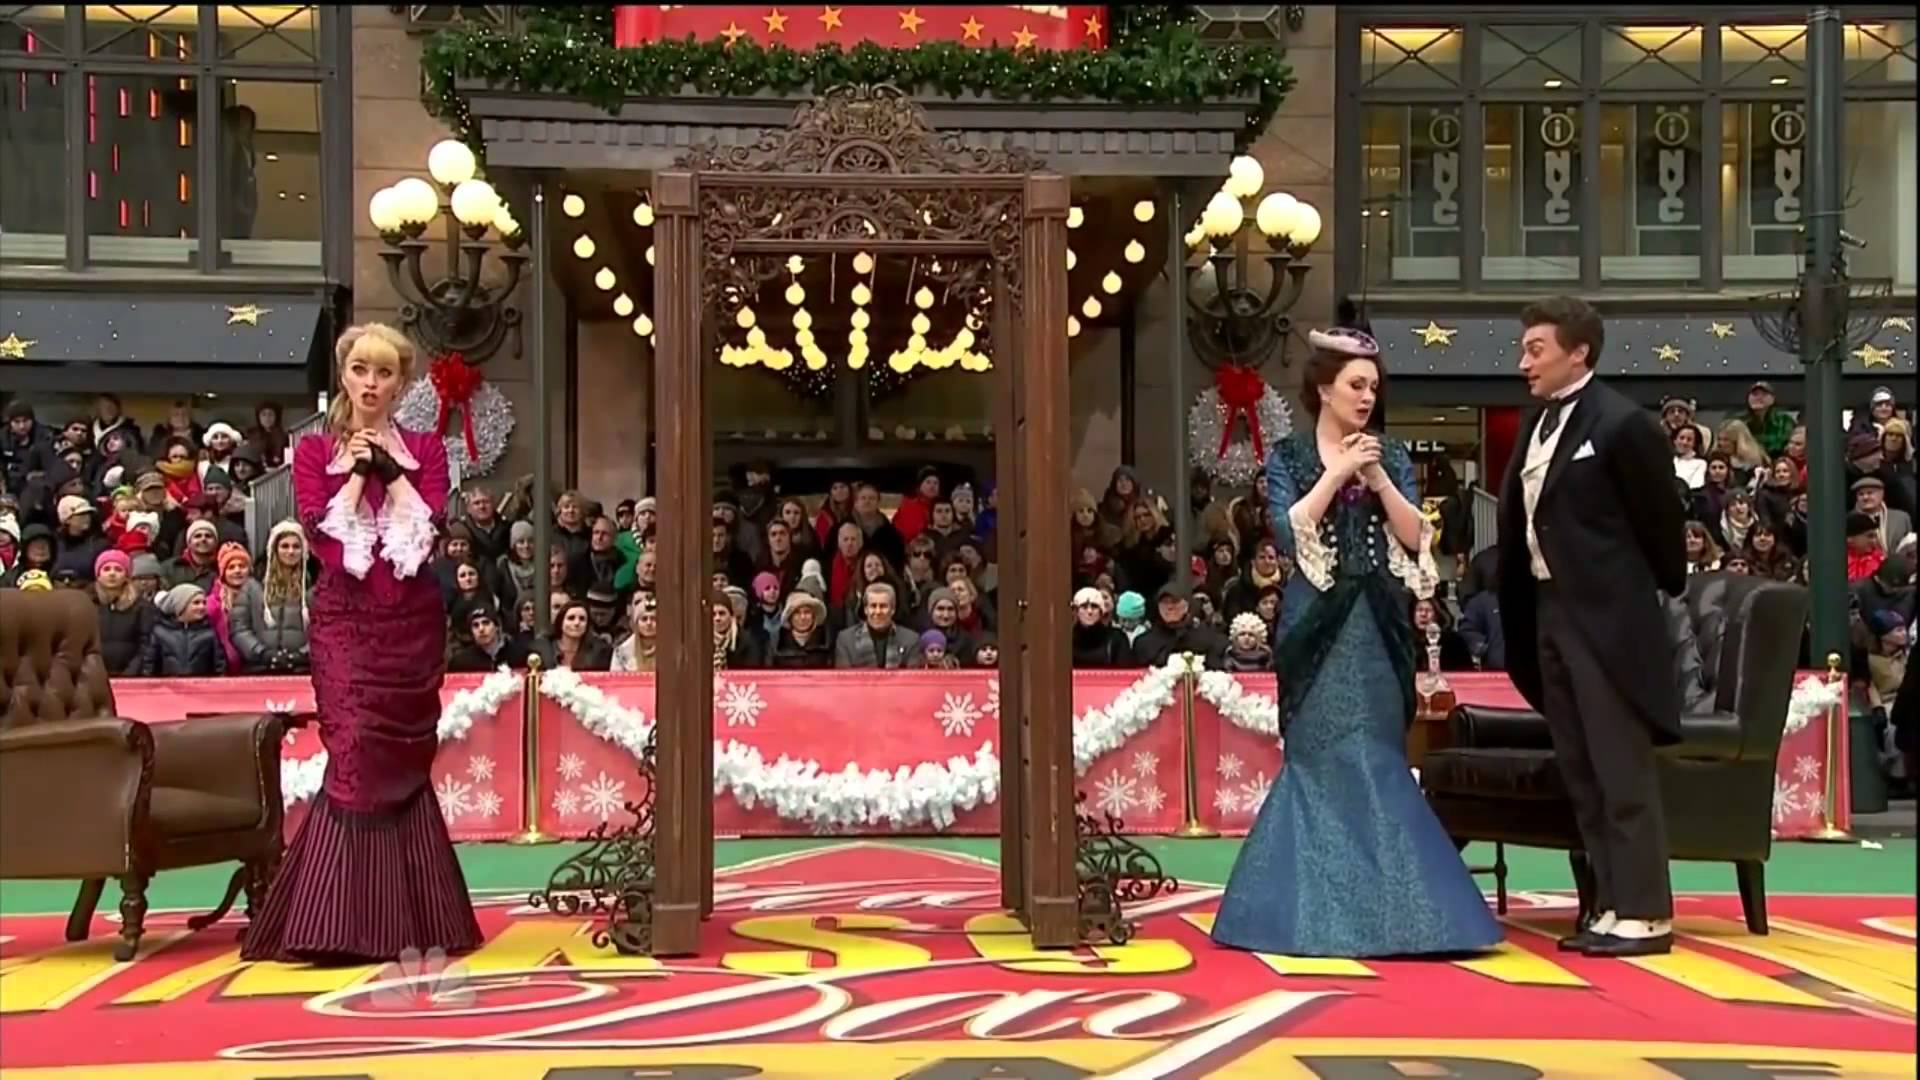 Thanksgiving Day Parade 2014 - A Gentleman's Guide to Love and Murder